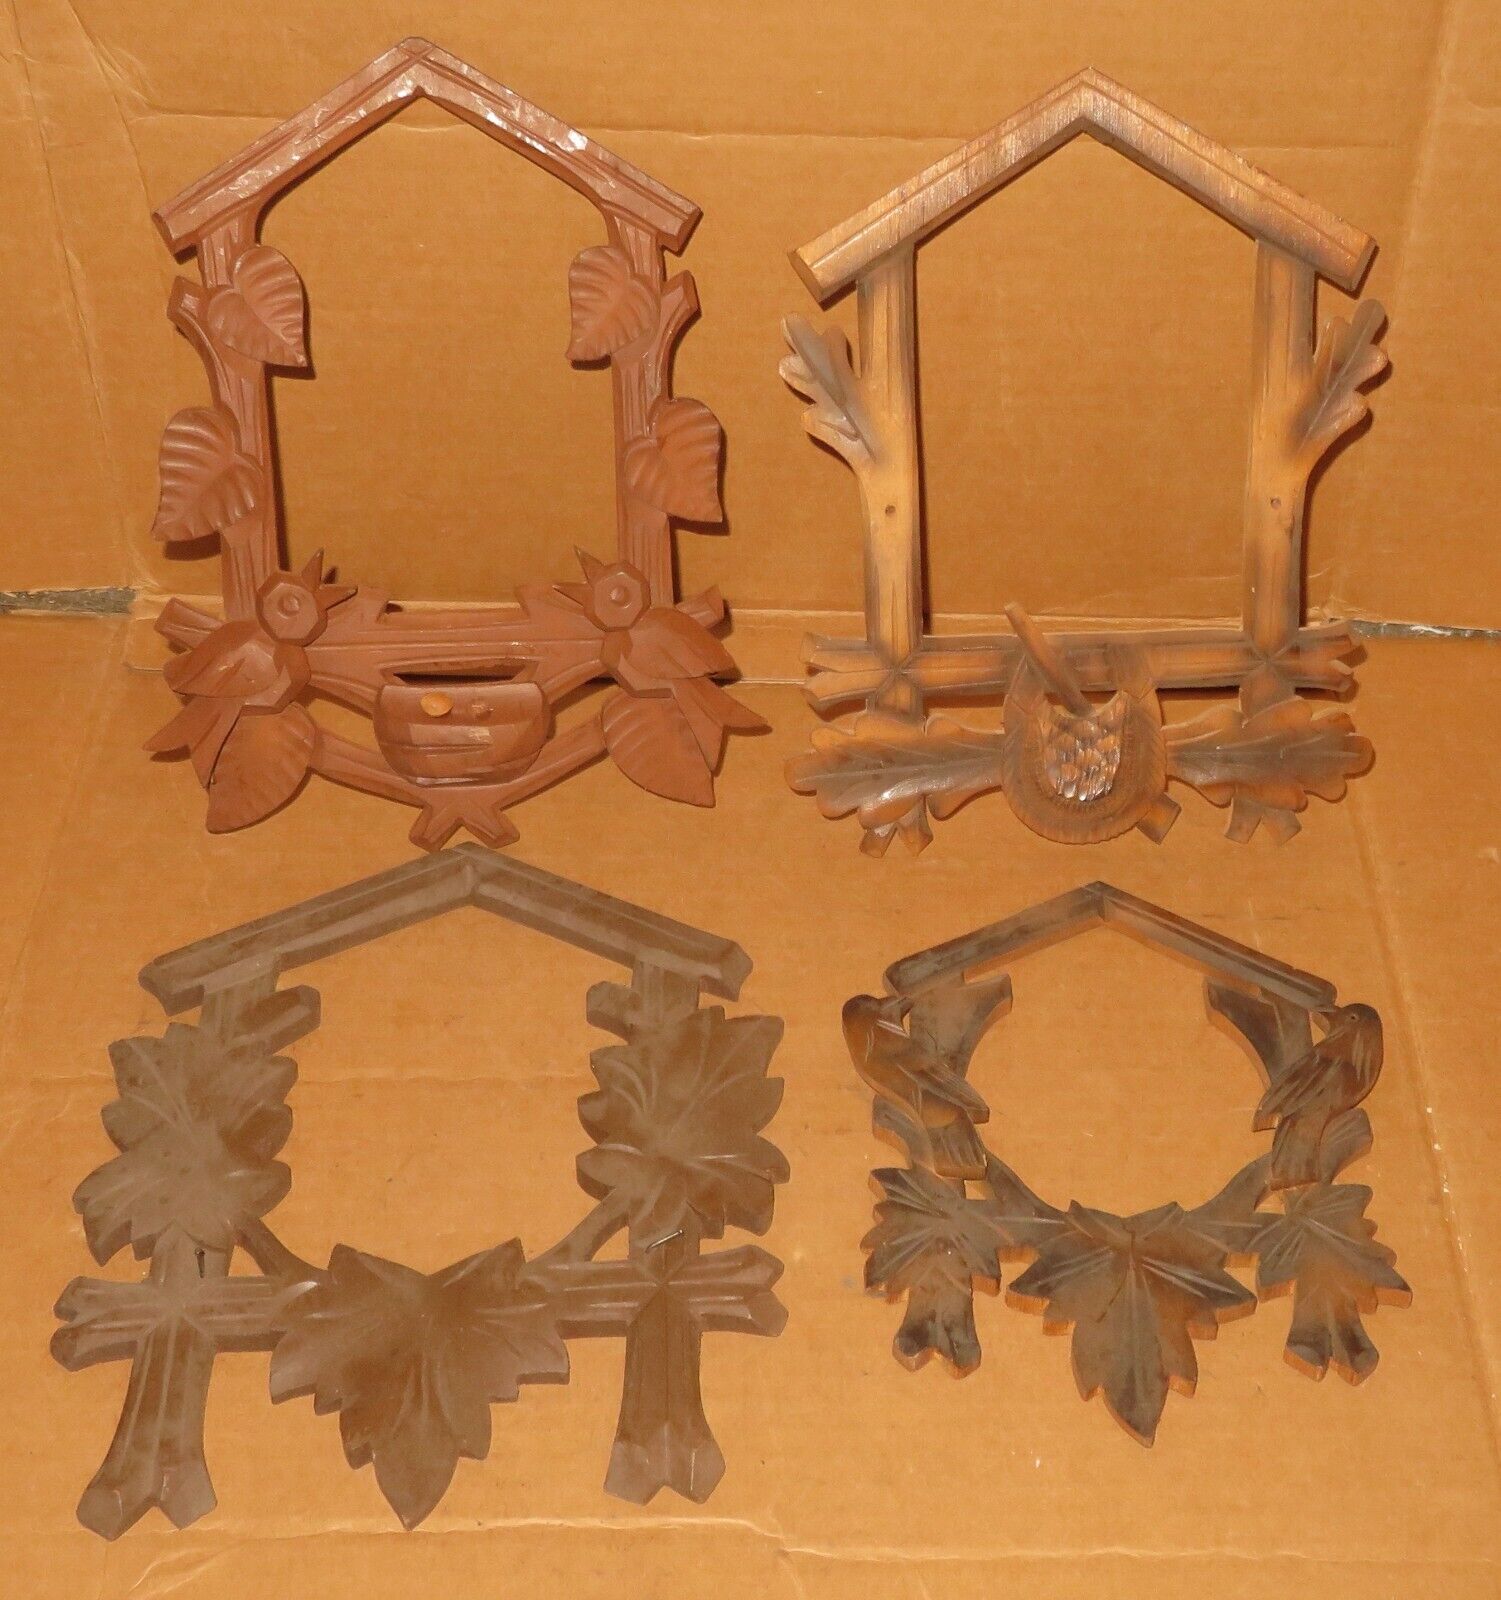 Lot of 4 Vintage Cuckoo Clock Parts Decor Frame front for parts project AS IS